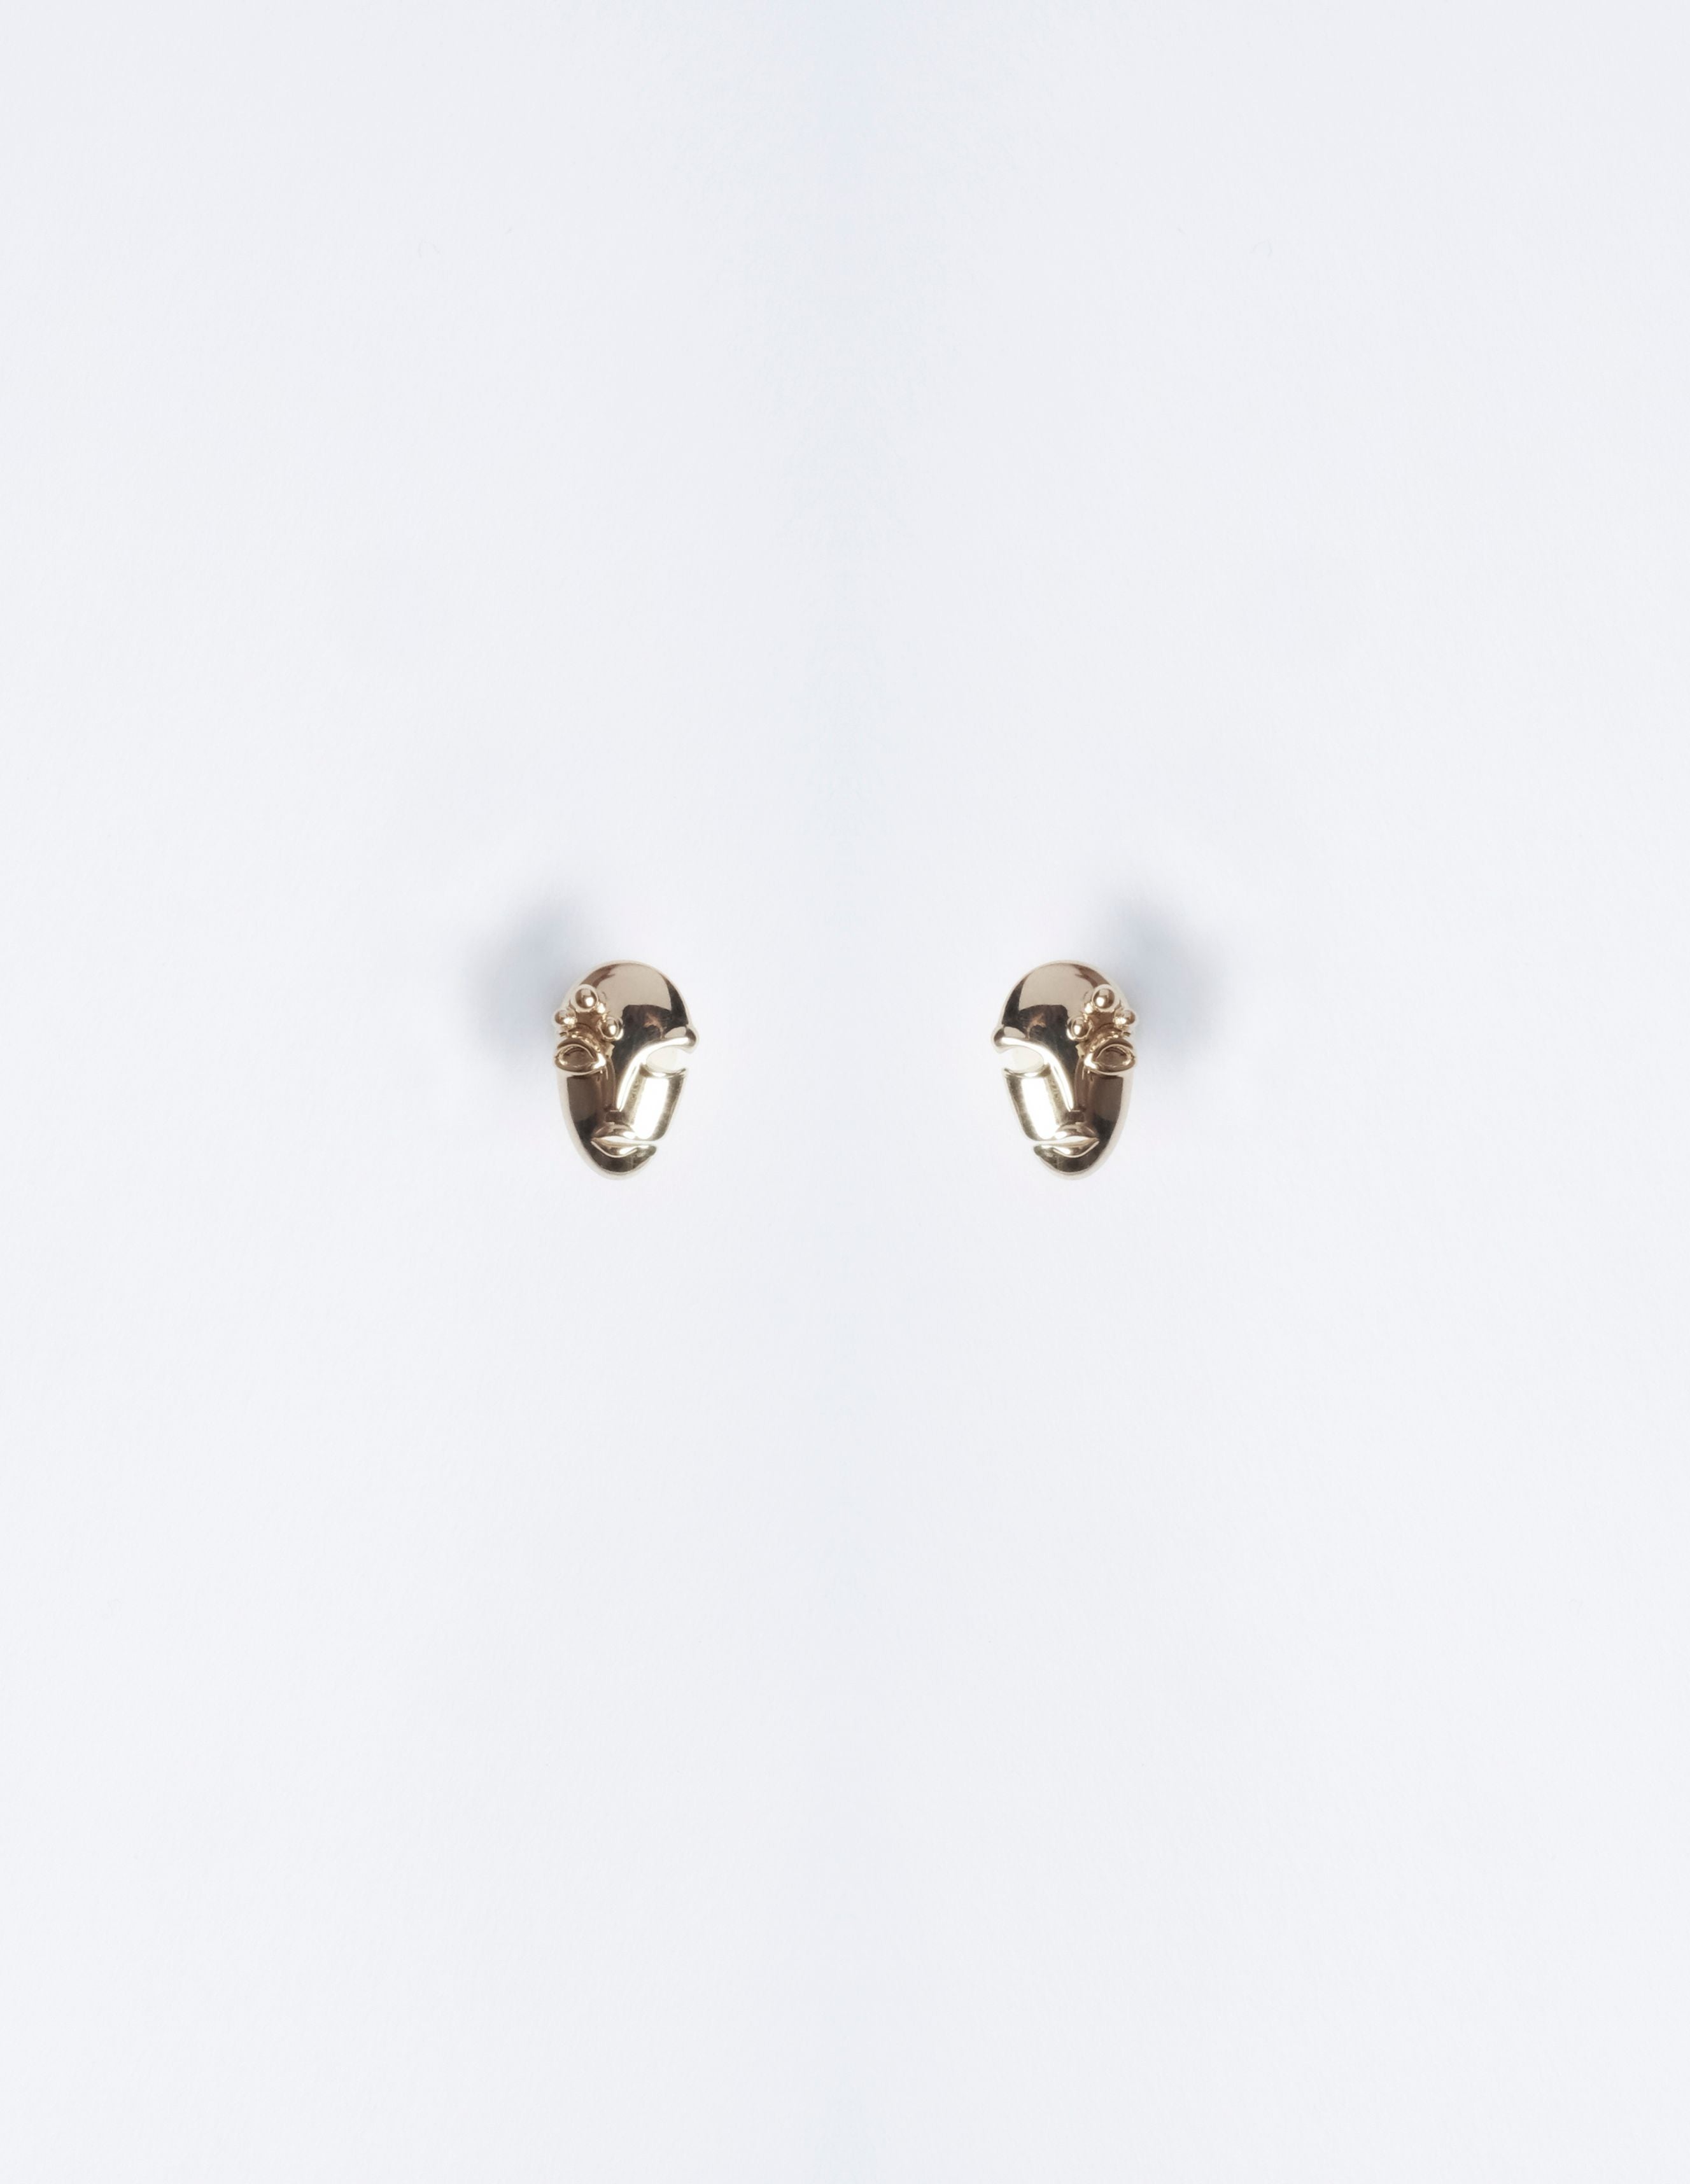 Pair of Tiny Mask Studs in 14K Gold